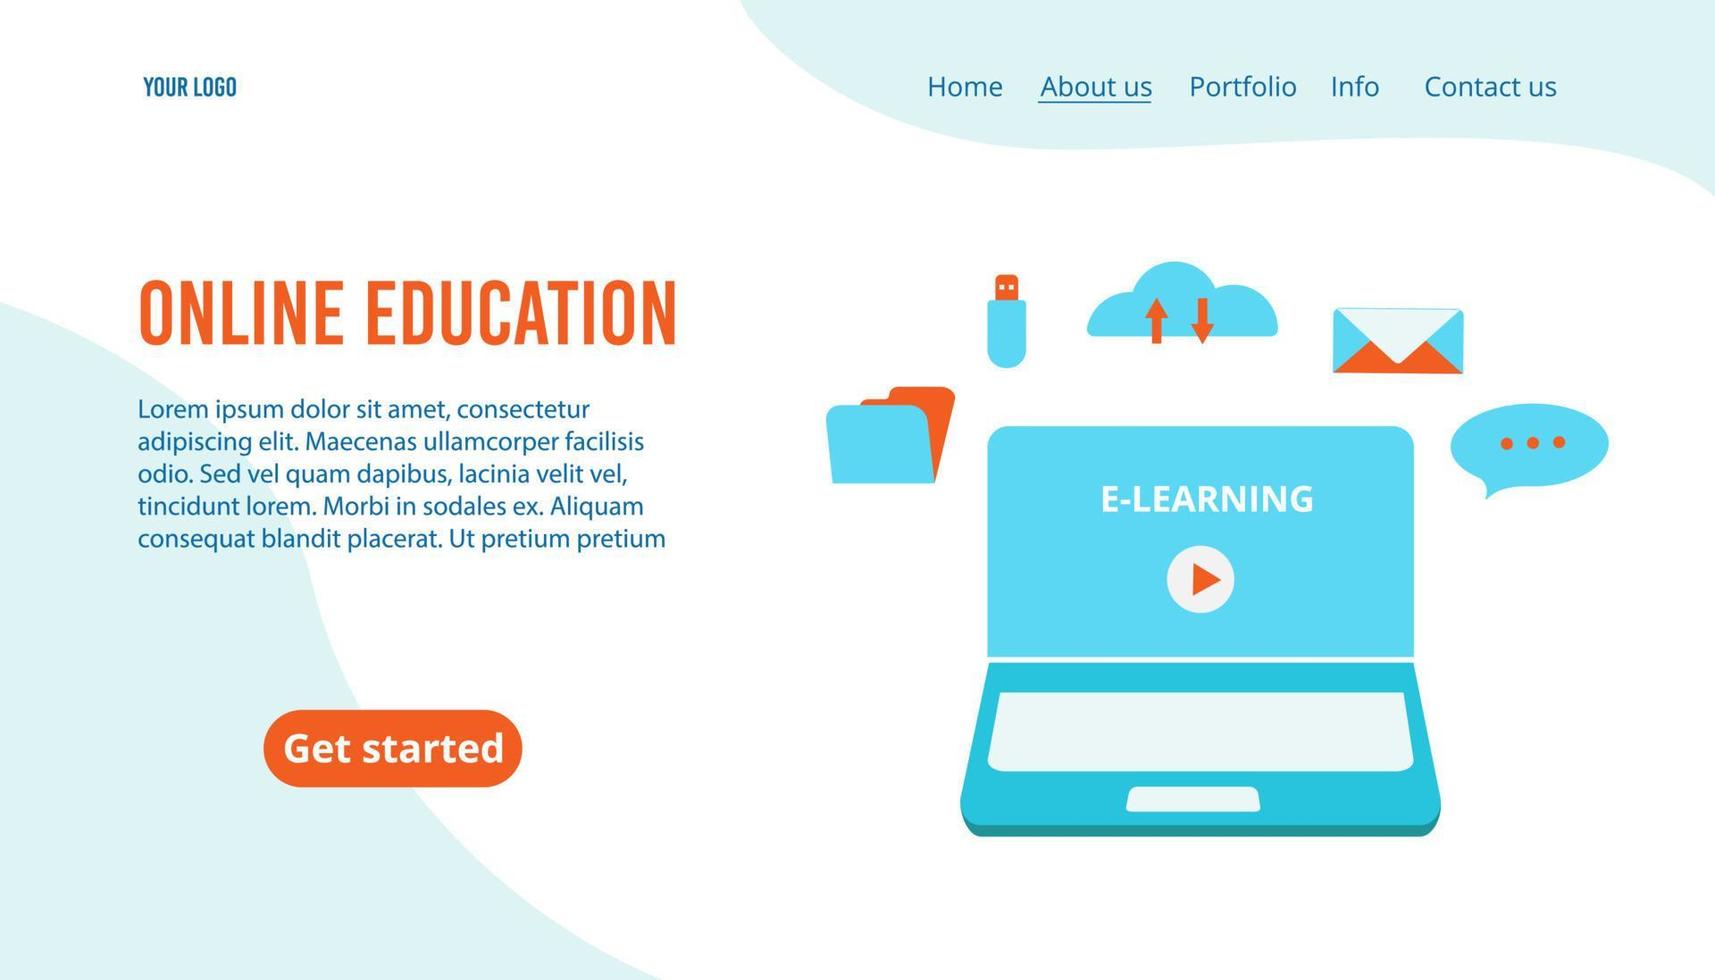 Online education concept for a website and mobile site. Modern flat design. Landing page template. Easy to edit and customize. Vector illustration isolated on a white background.